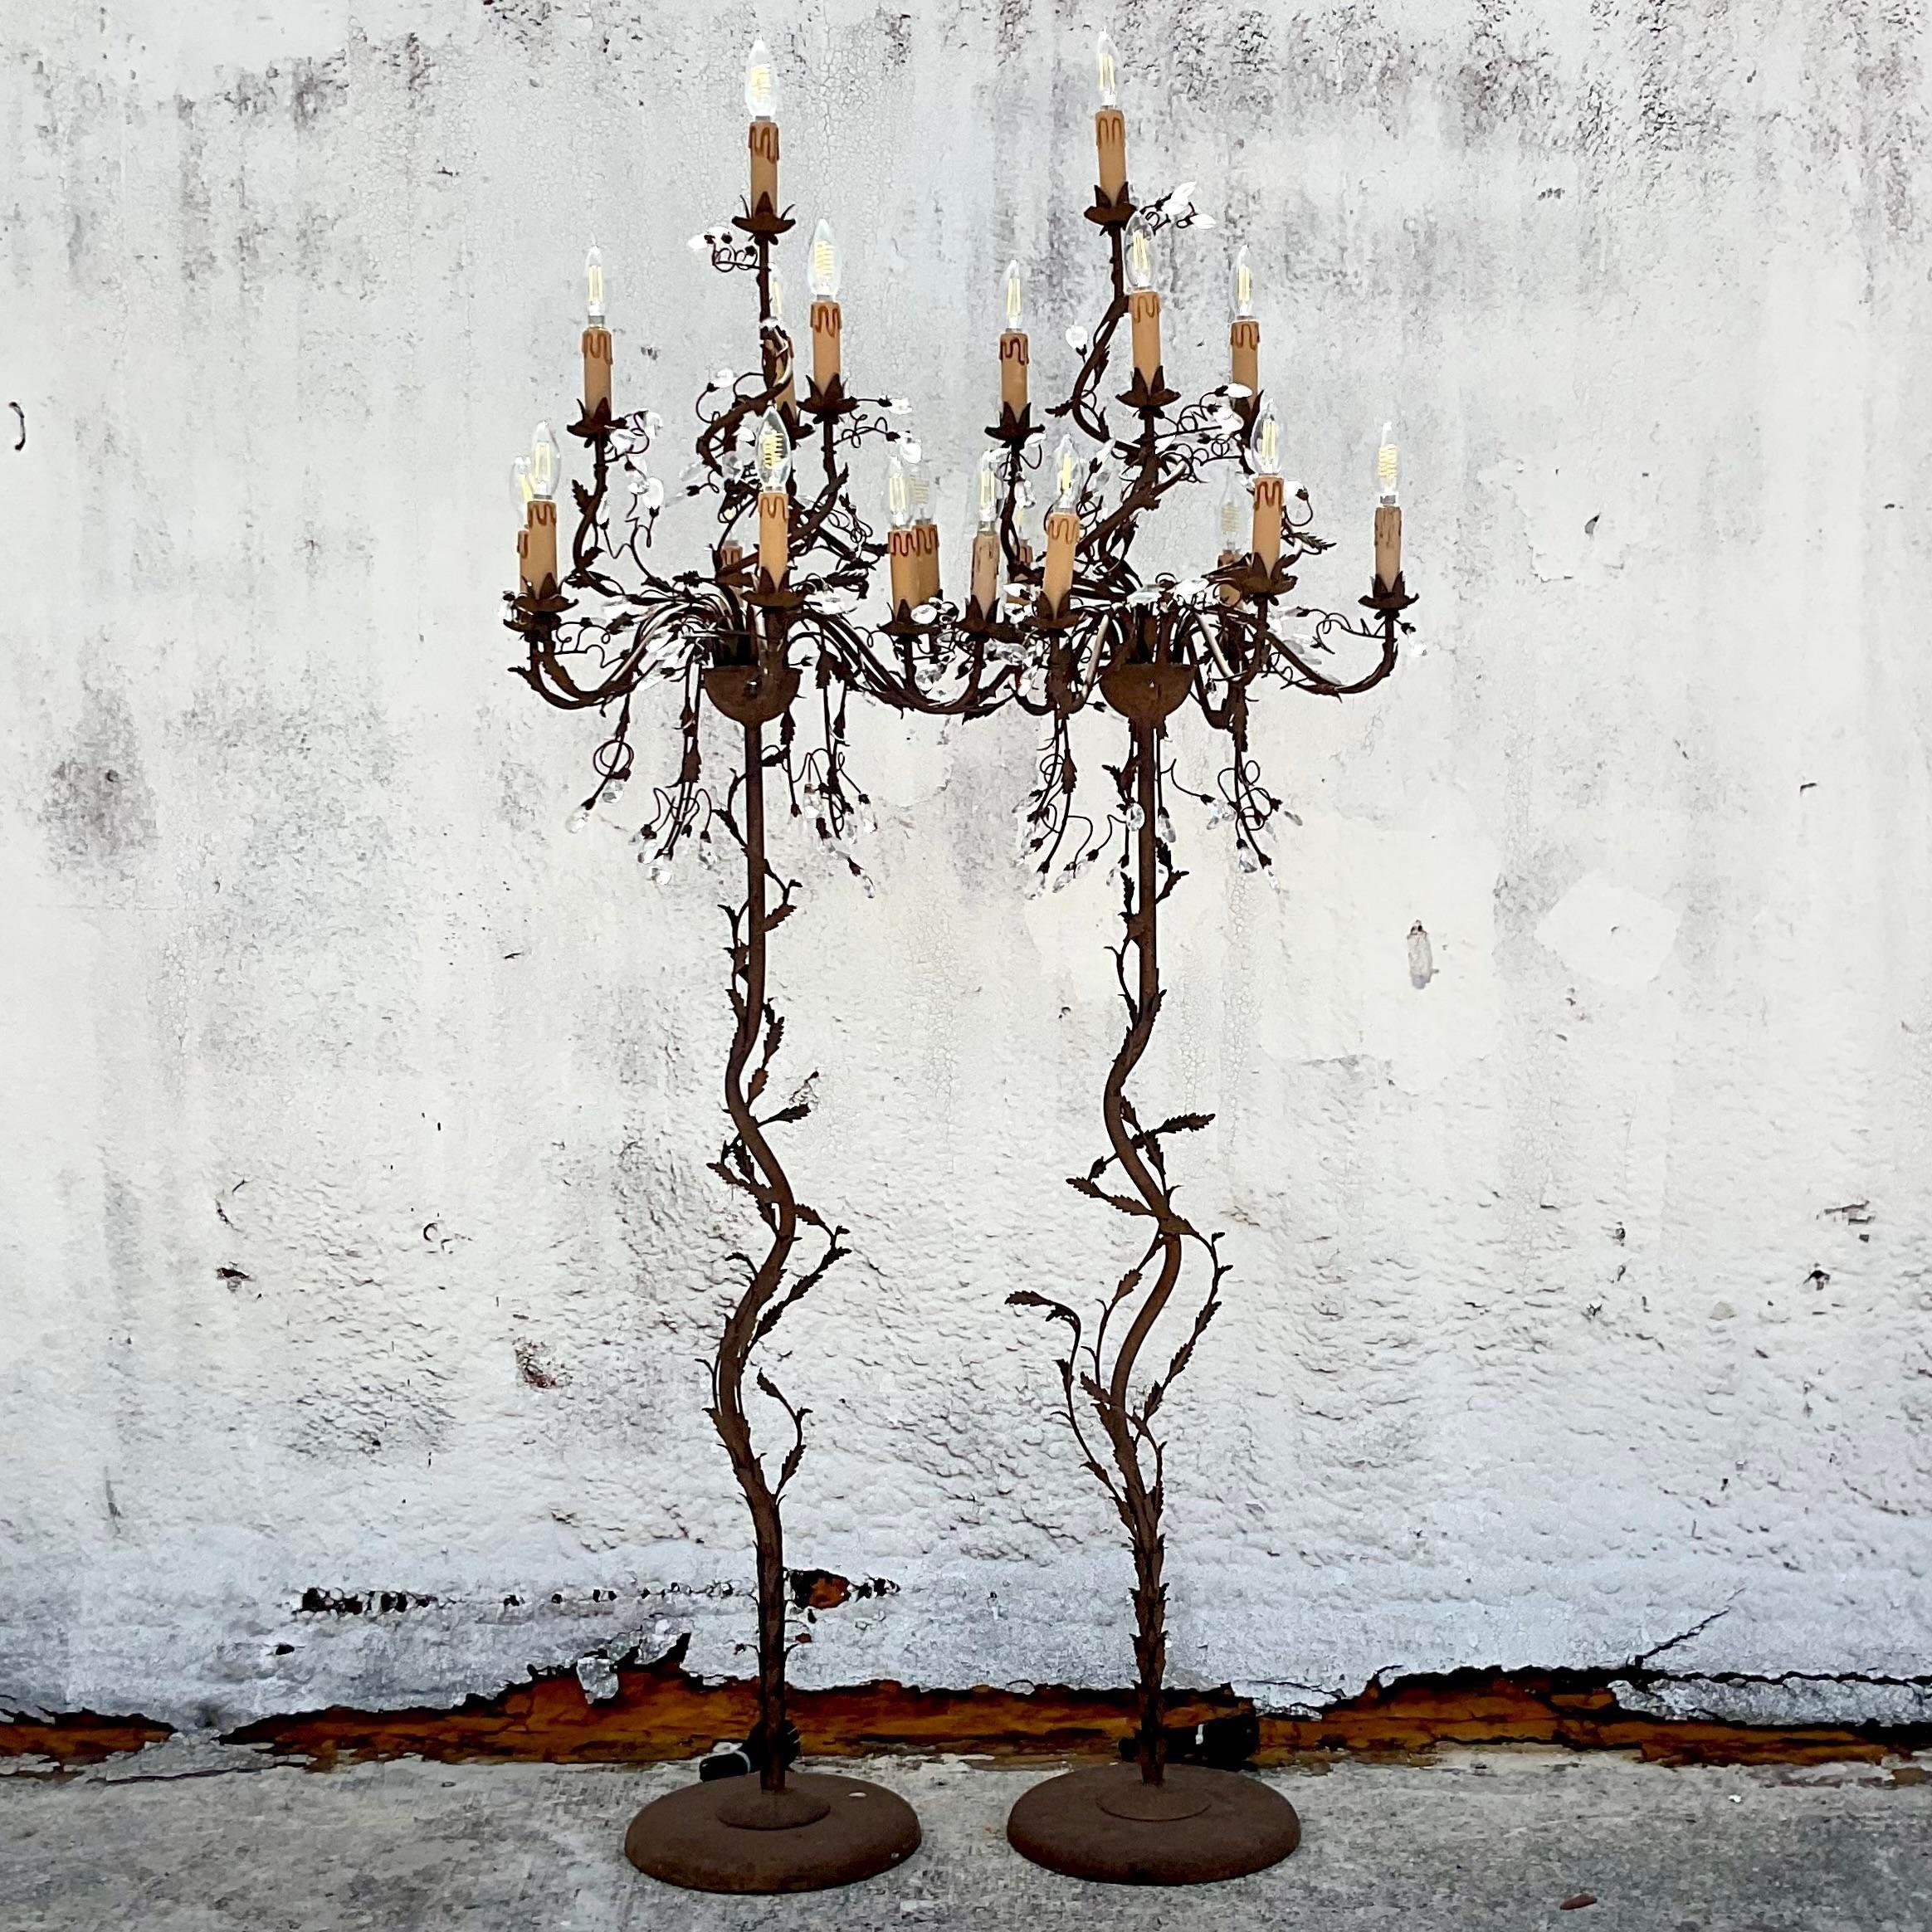 20th Century Vintage Boho Patinated Crystal Teardrop Floor Chandelier Lamps - a Pair For Sale